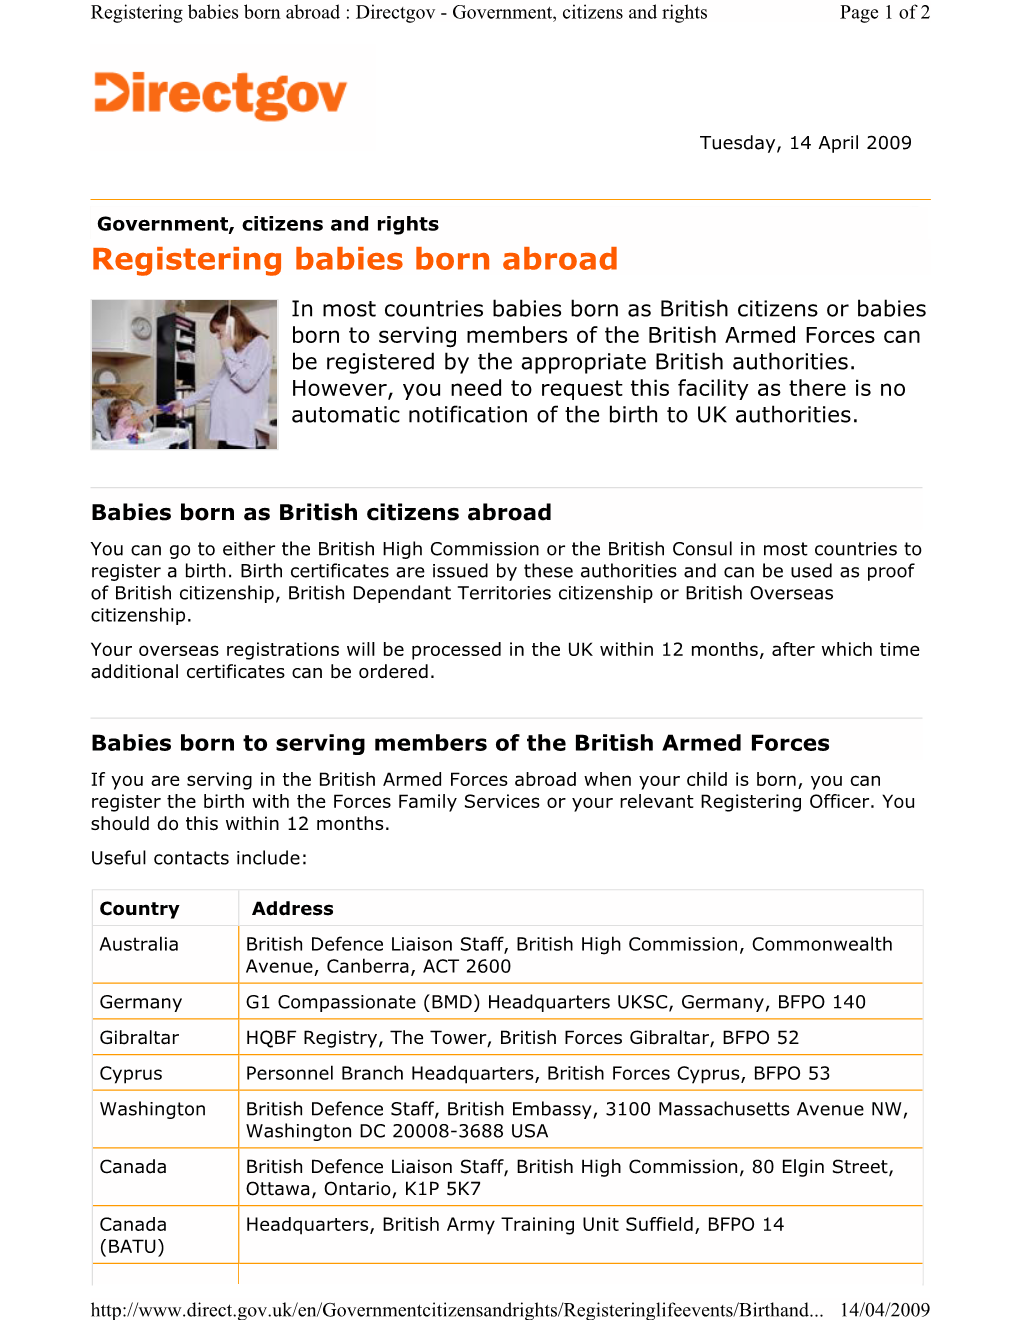 Registering Babies Born Abroad : Directgov - Government, Citizens and Rights Page 1 of 2